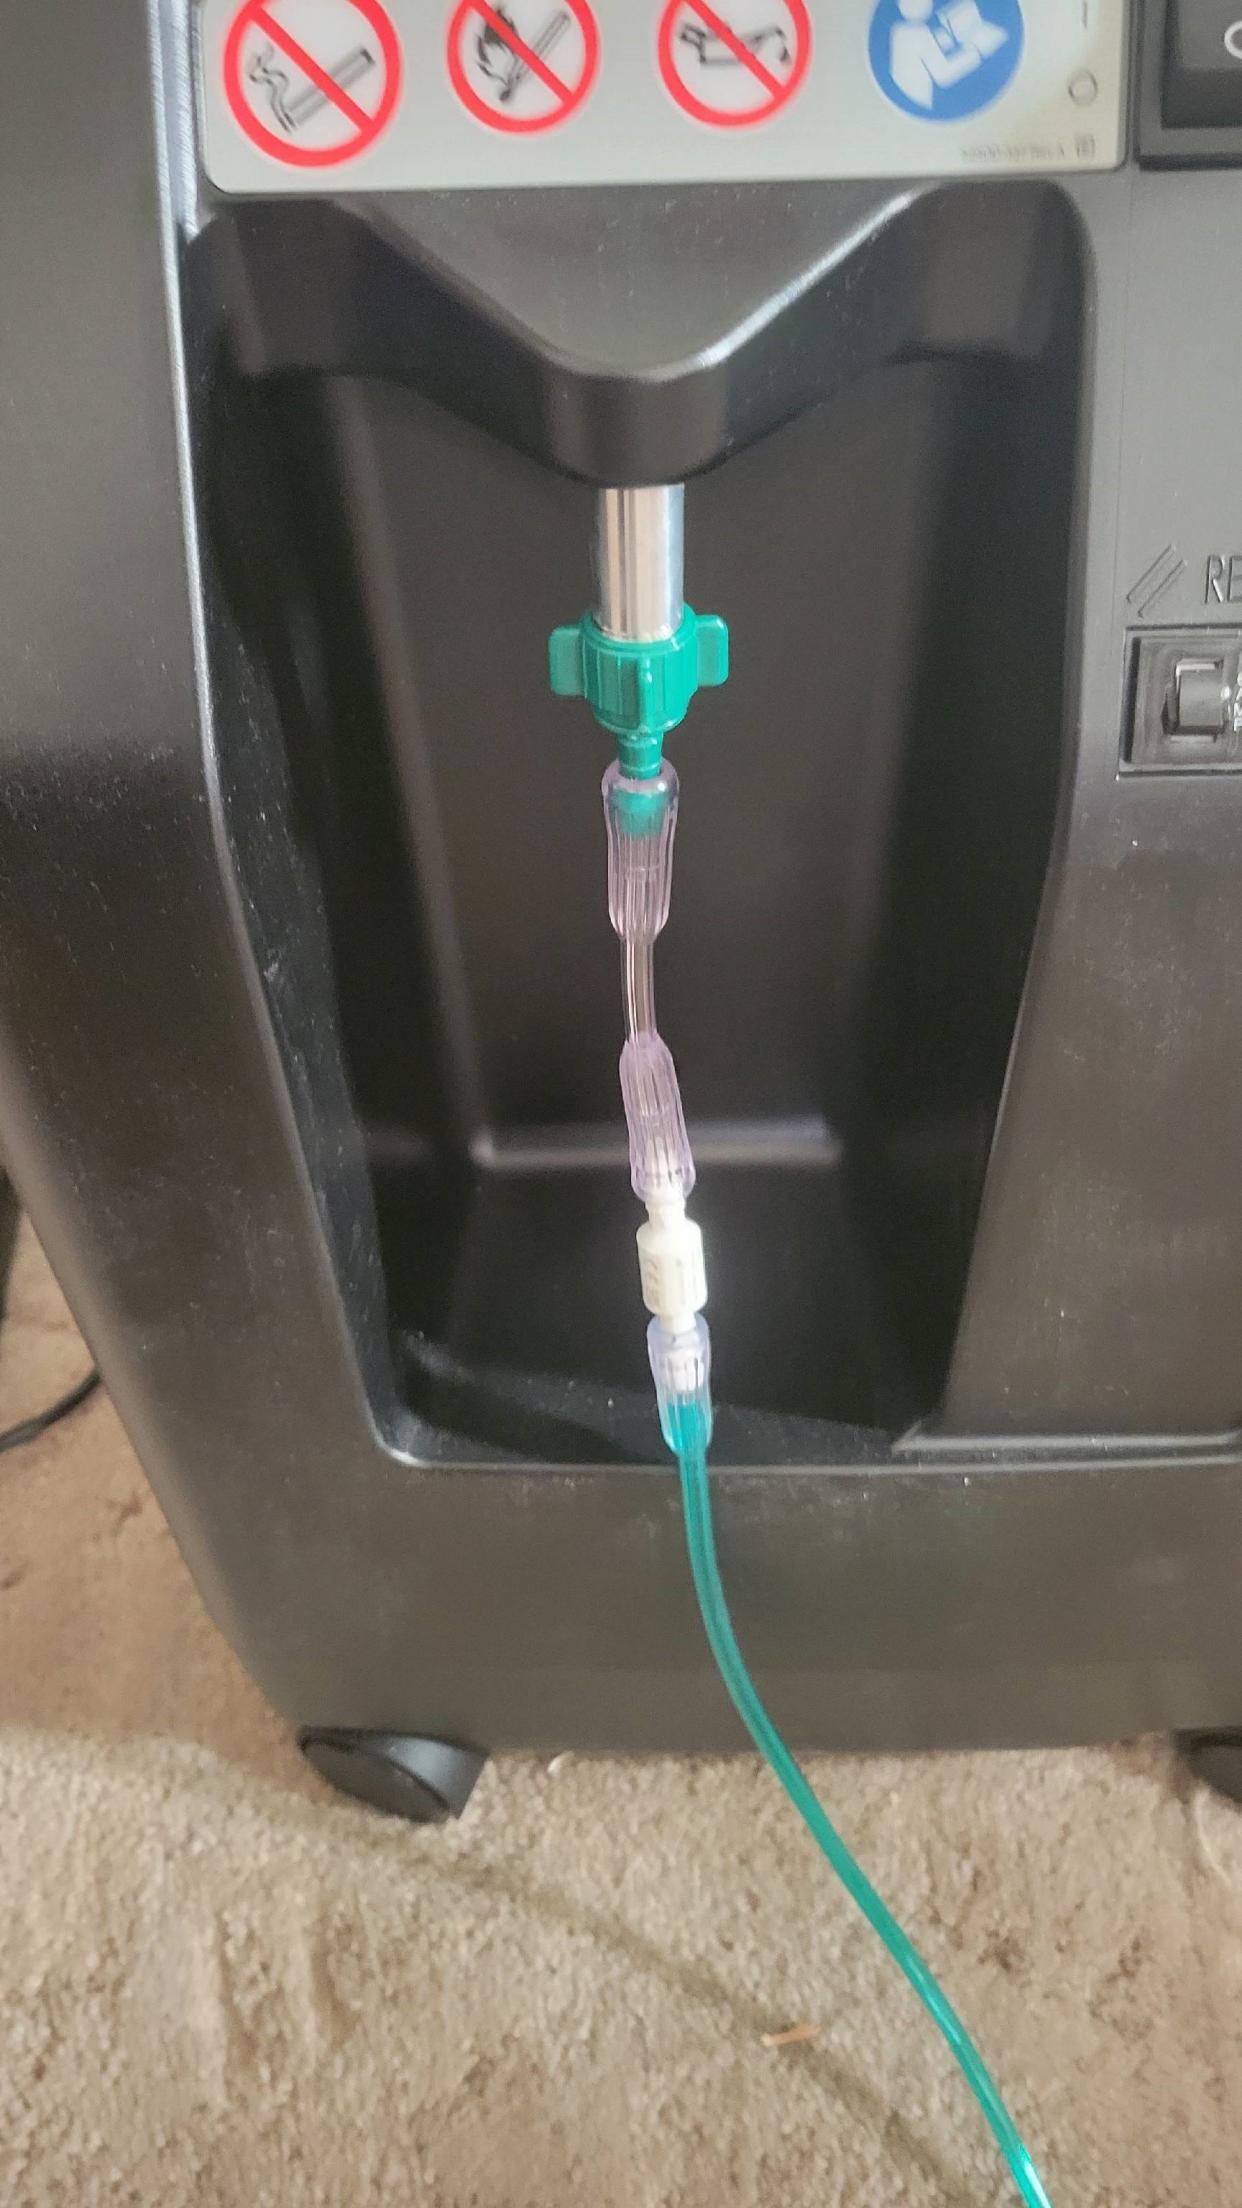 Thermal fuses stop the flow of oxygen when fire reaches home oxygen materials. They cost less than $9 for two devices, one placed at the oxygen concentrator and in the oxygen tubing near the patient.